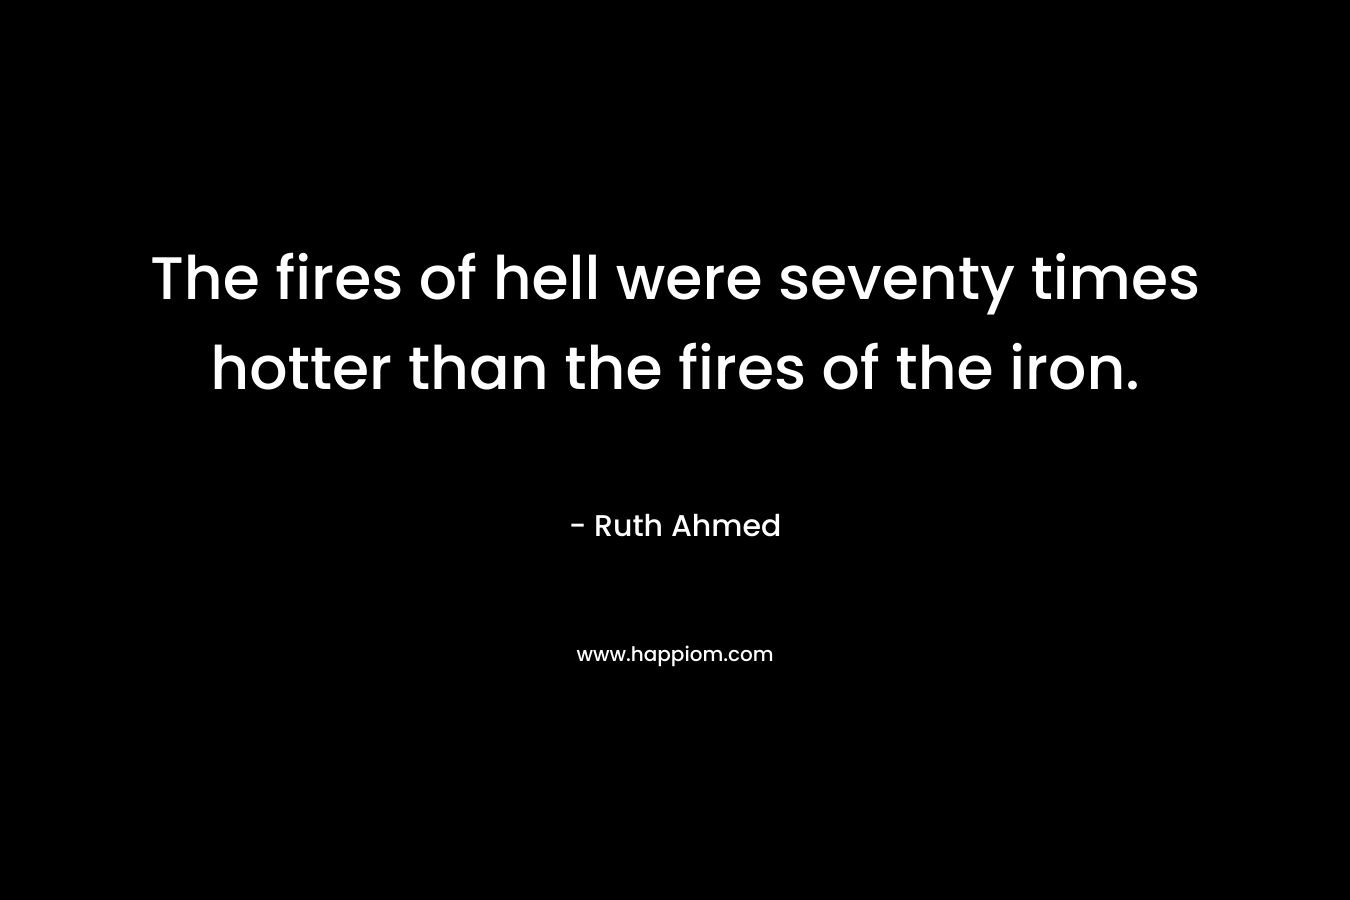 The fires of hell were seventy times hotter than the fires of the iron.